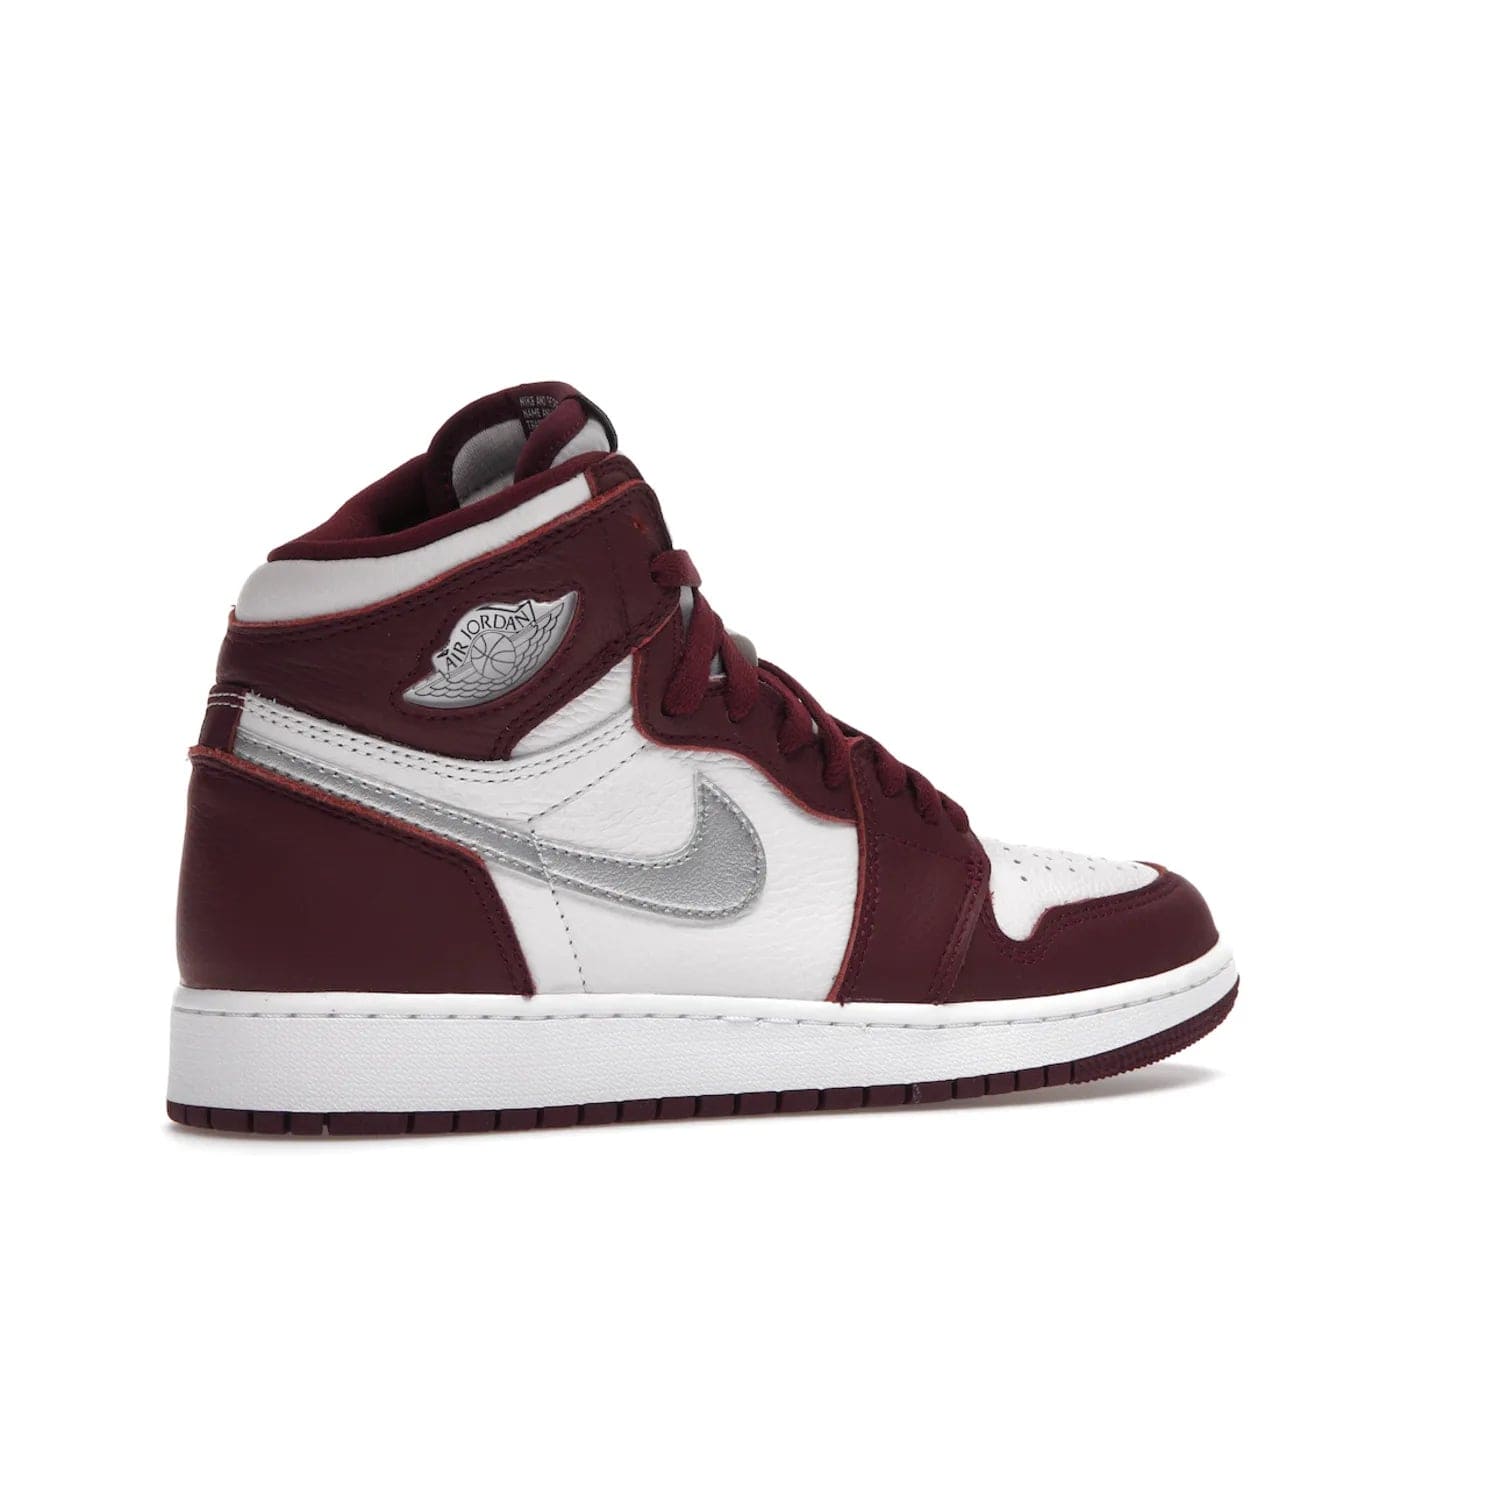 Jordan 1 Retro High OG Bordeaux (GS) - Image 34 - Only at www.BallersClubKickz.com - #
Introducing the Air Jordan 1 Retro High OG Bordeaux GS – a signature colorway part of the Jordan Brand Fall 2021 lineup. White leather upper & Bordeaux overlays, metallic silver swoosh, jeweled Air Jordan Wings logo & more. Step up your style game with this sleek fall season silhouette.